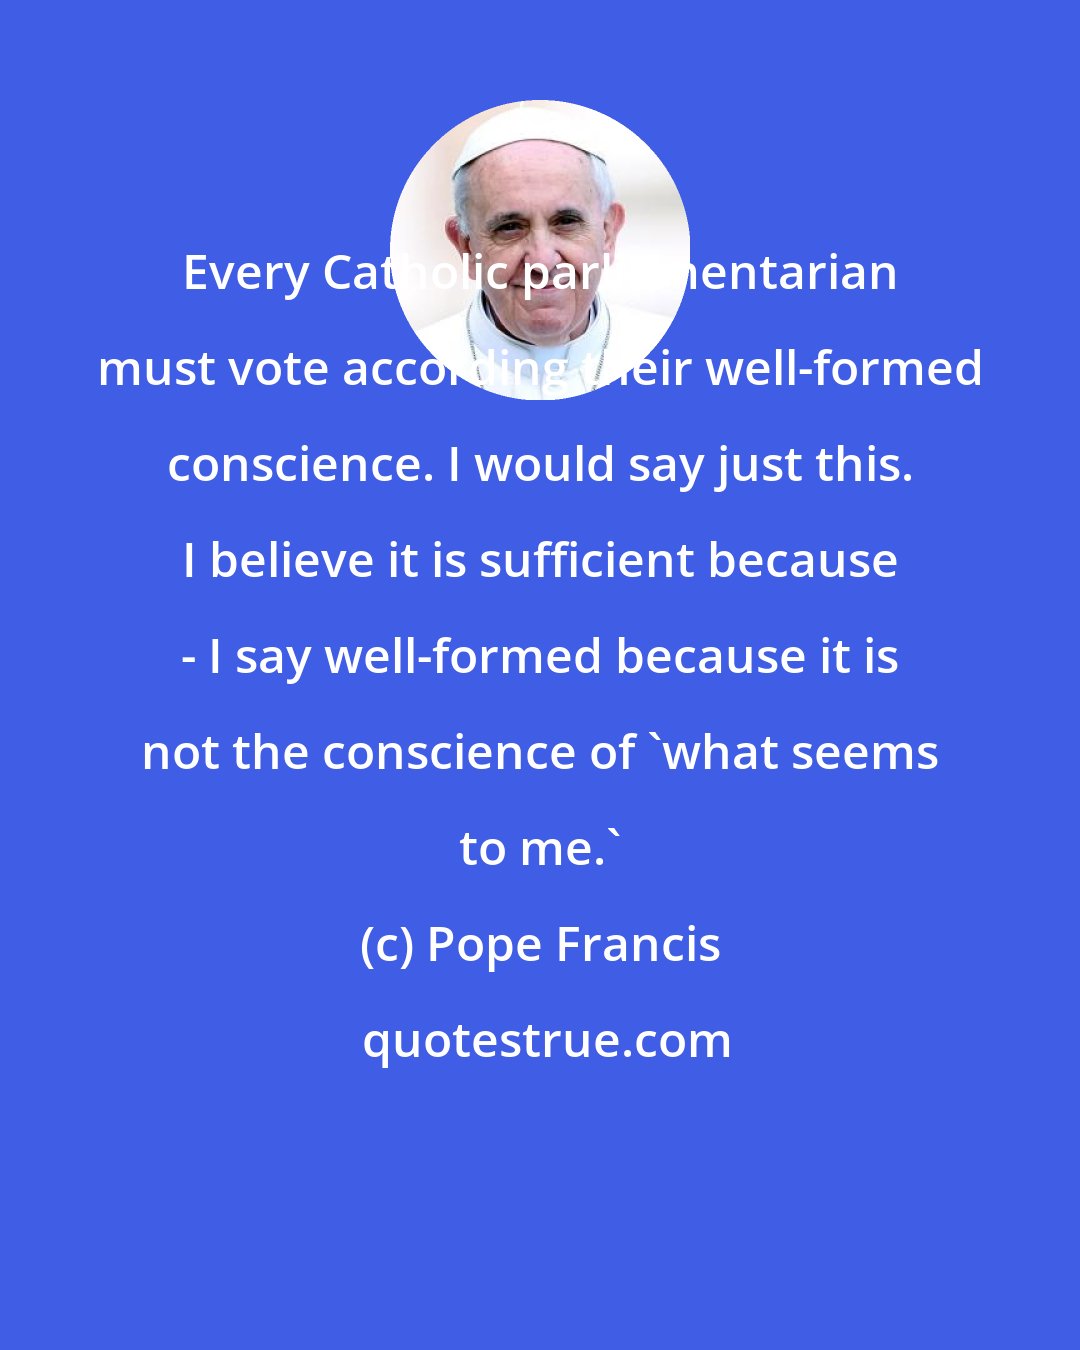 Pope Francis: Every Catholic parliamentarian must vote according their well-formed conscience. I would say just this. I believe it is sufficient because - I say well-formed because it is not the conscience of 'what seems to me.'